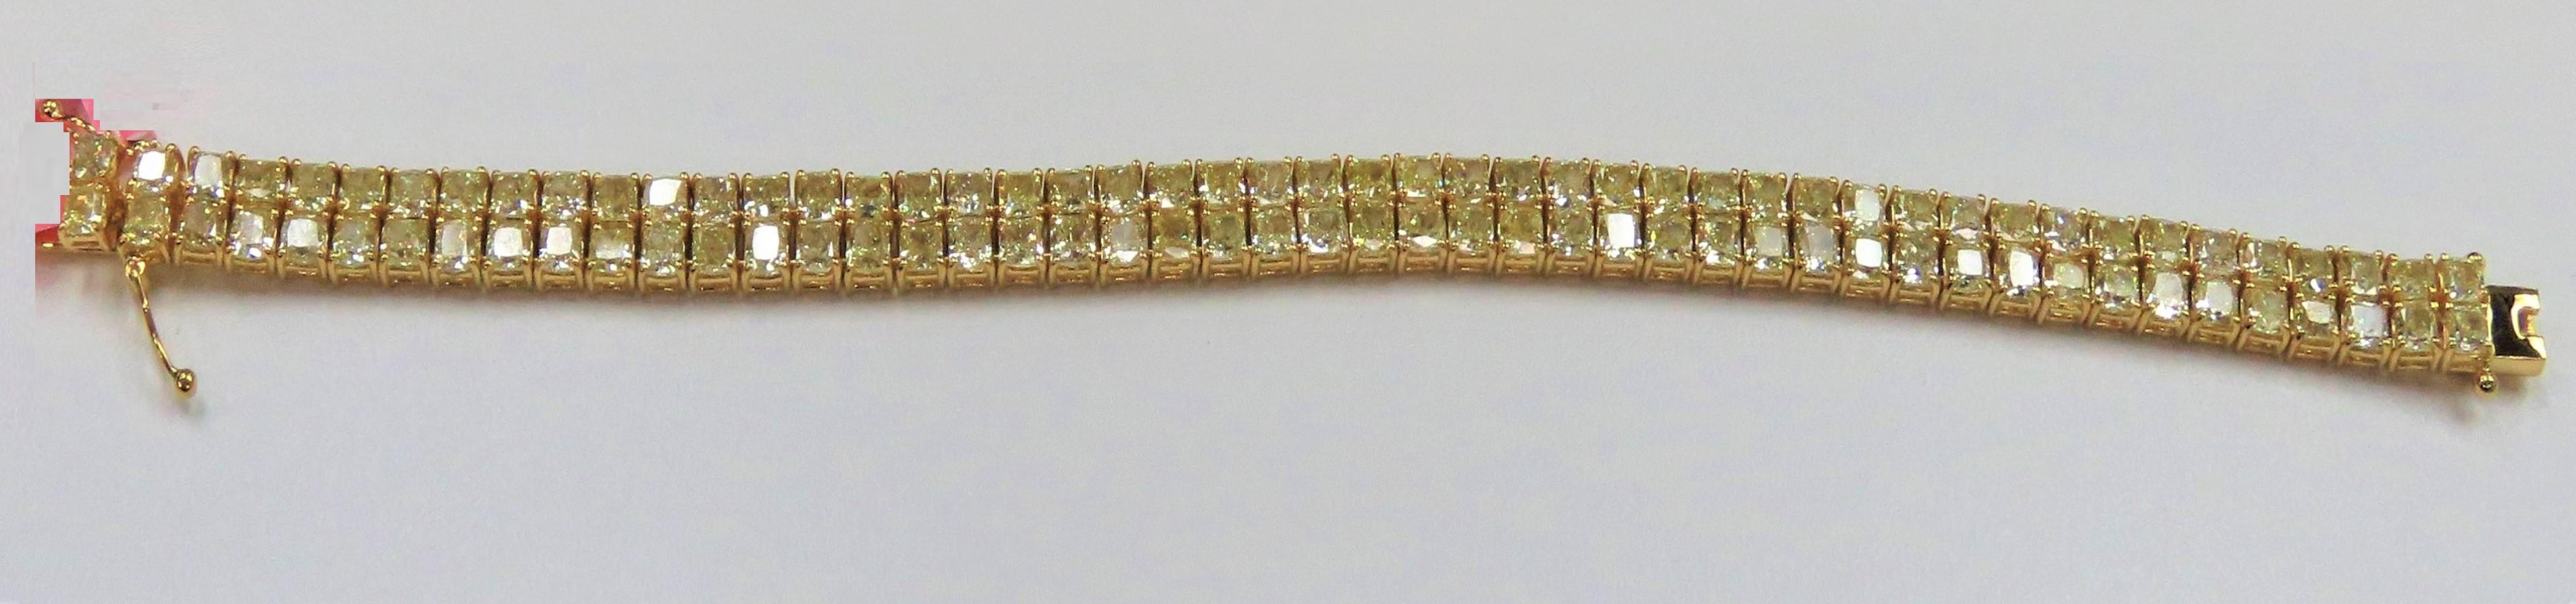 The Following Item we are offering is a Rare Important Radiant 18KT Gold Fancy Yellow Diamond Bracelet! This Magnificent Fancy Yellow Diamond Bracelet has approx 24CTS of Fine Fancy Yellow Diamonds!! This Gorgeous Bracelet is a Rare Masterpiece from